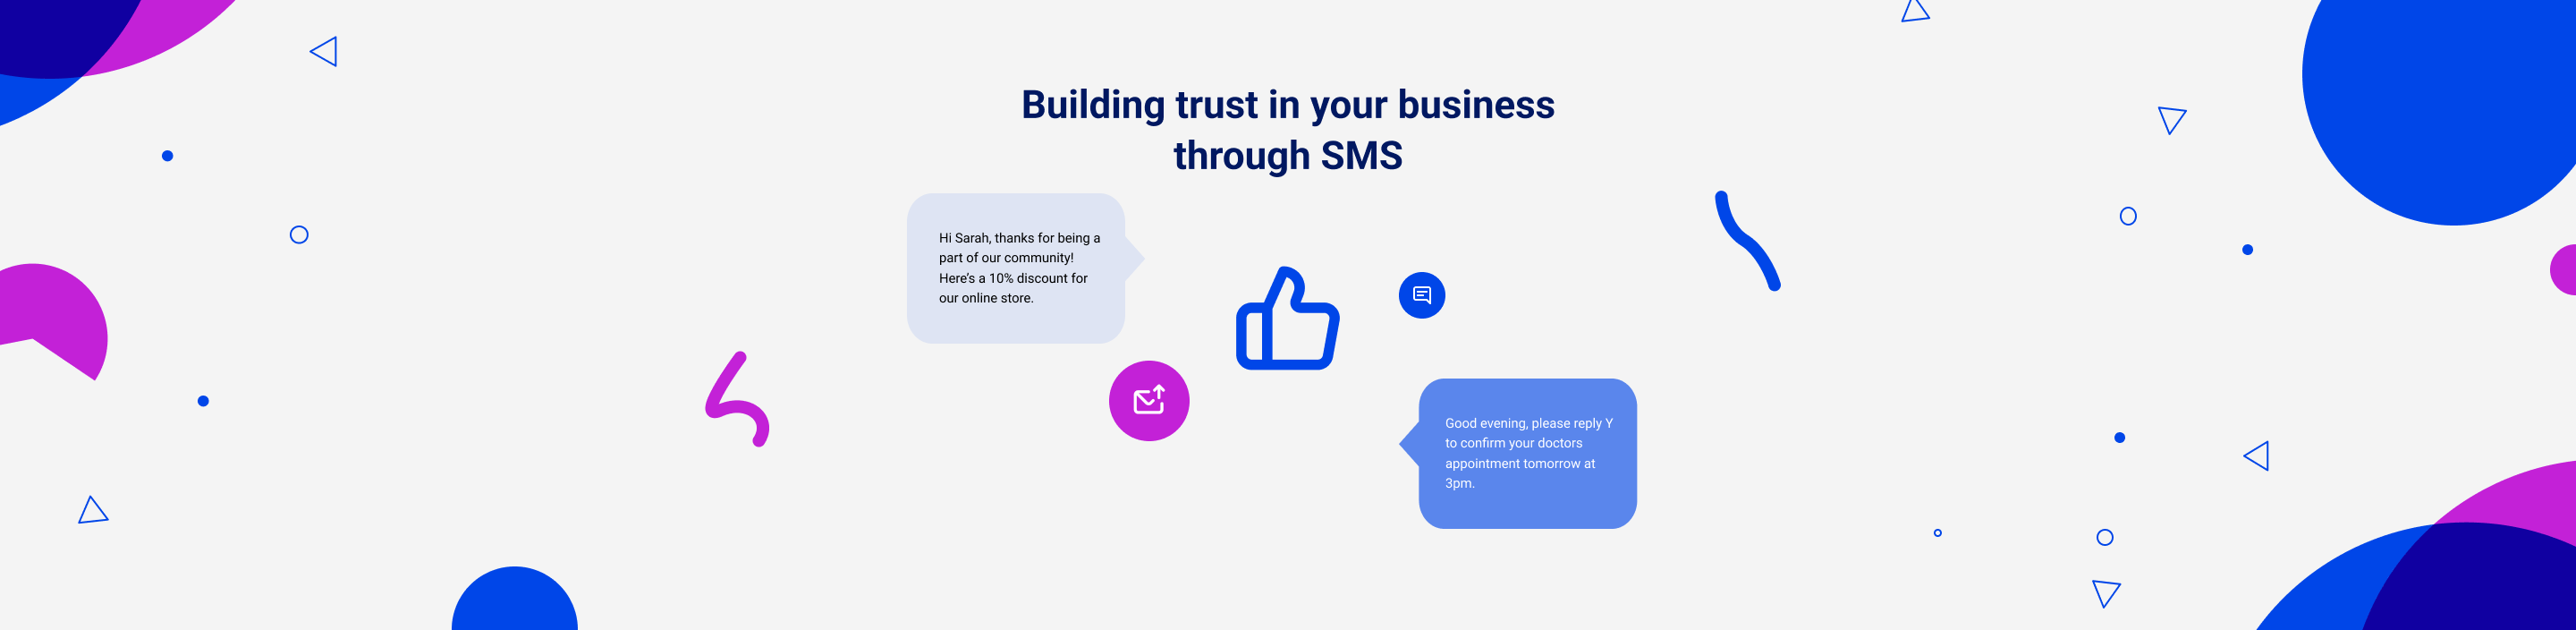 building-trust-in-your-business-via-sms